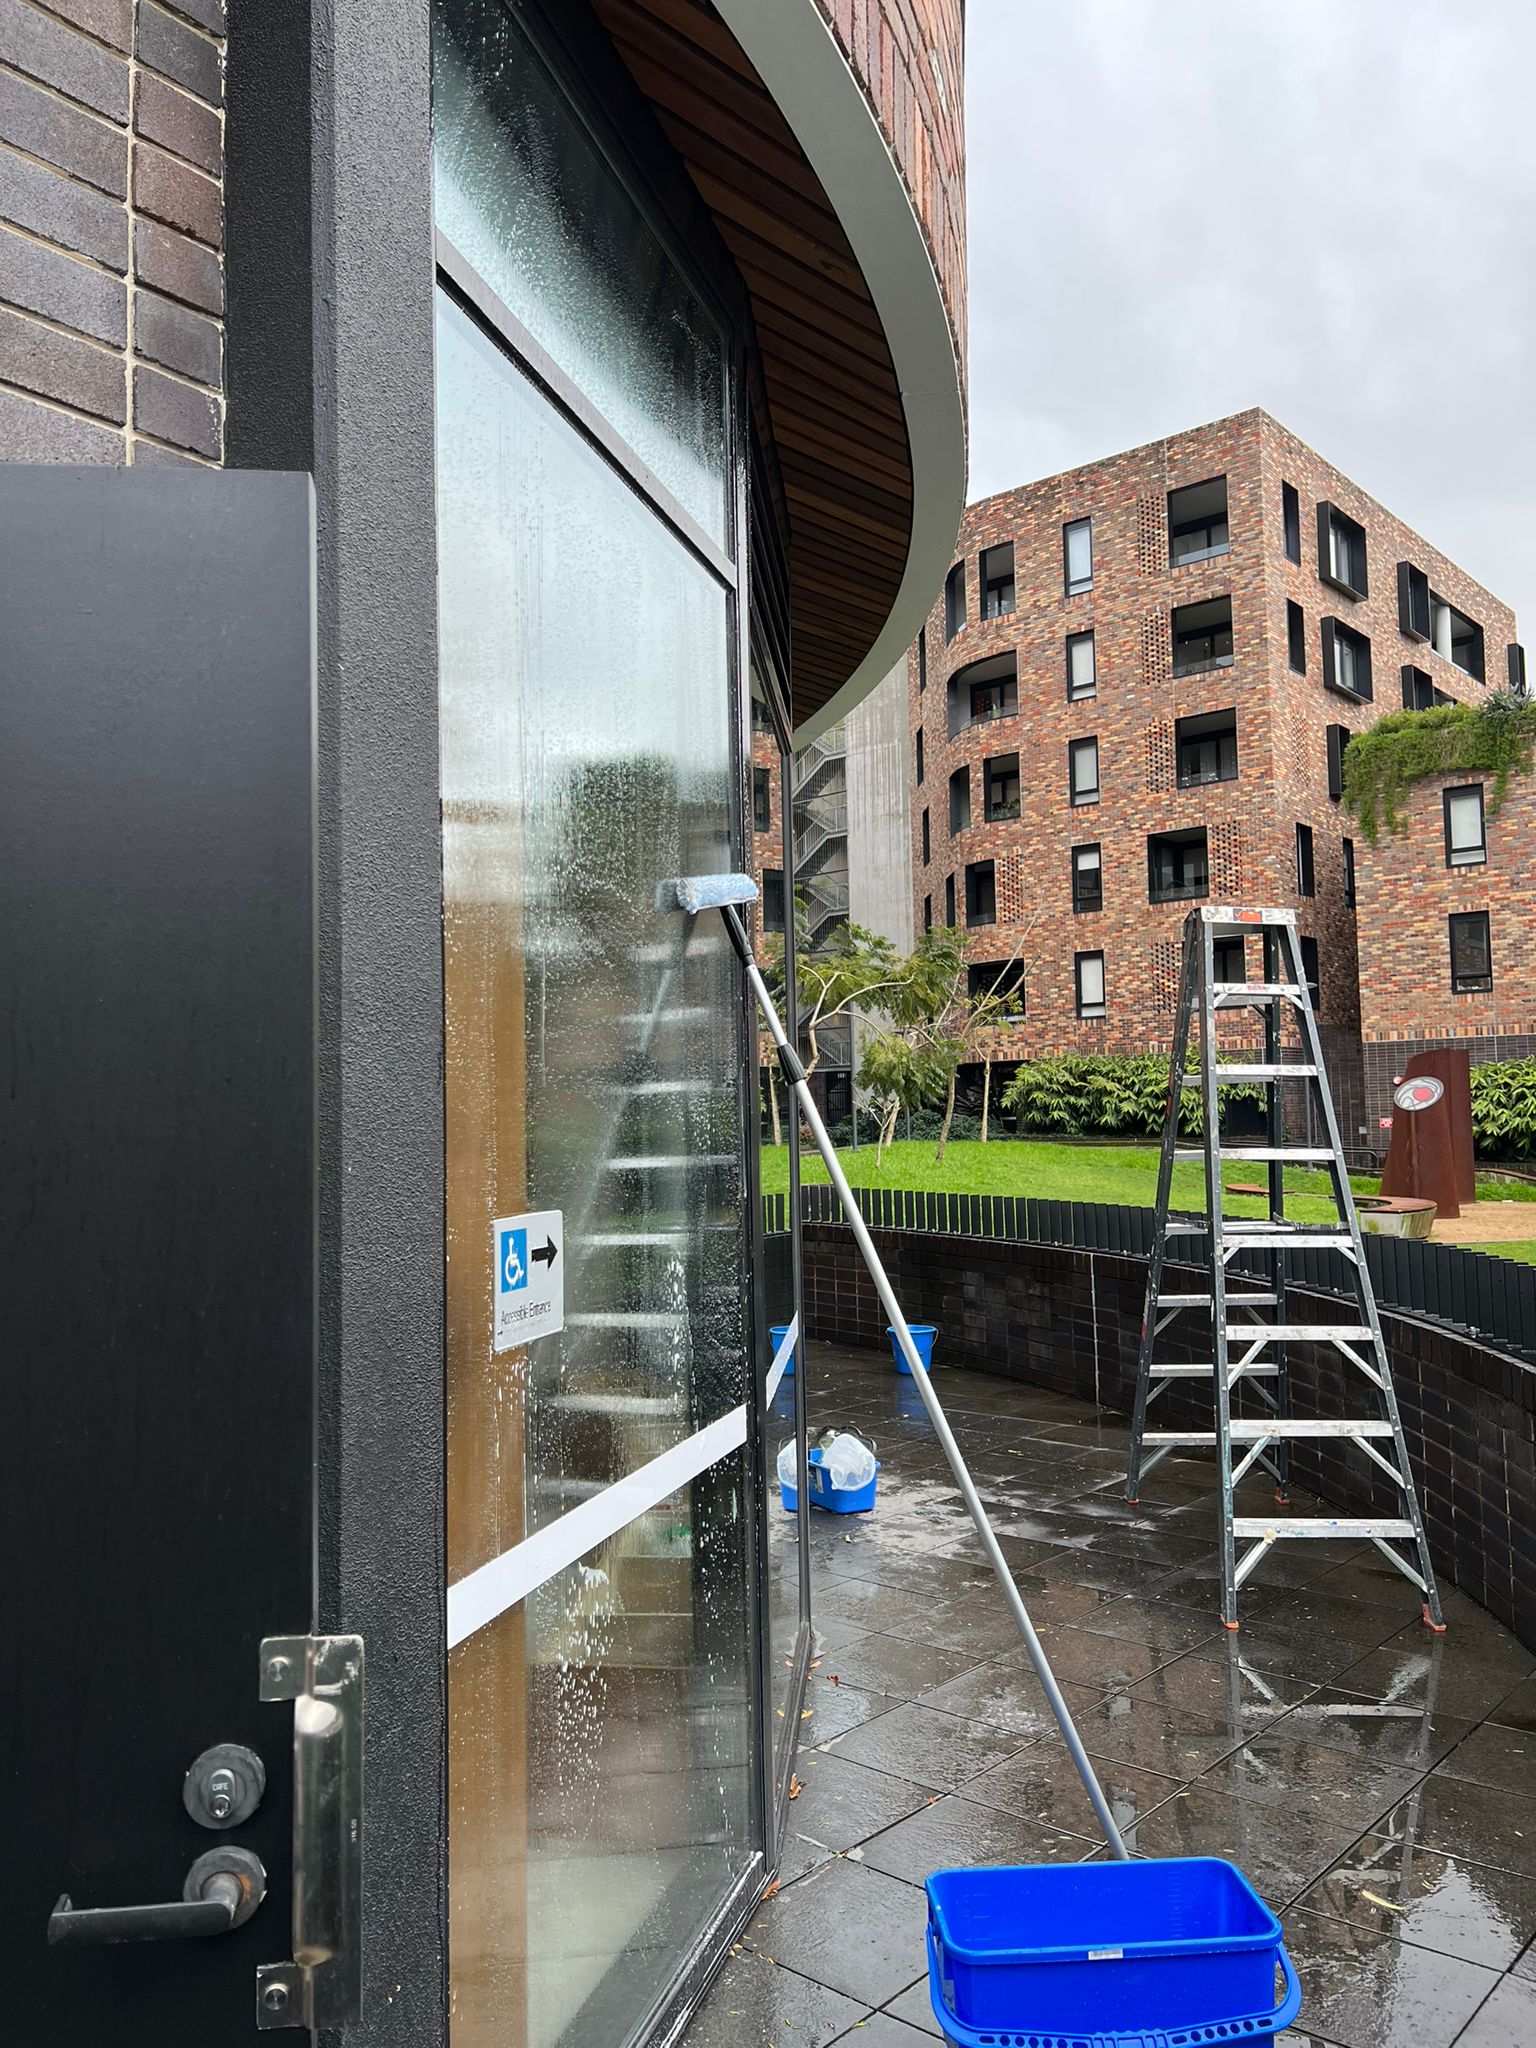 Window cleaning service company in Sydney